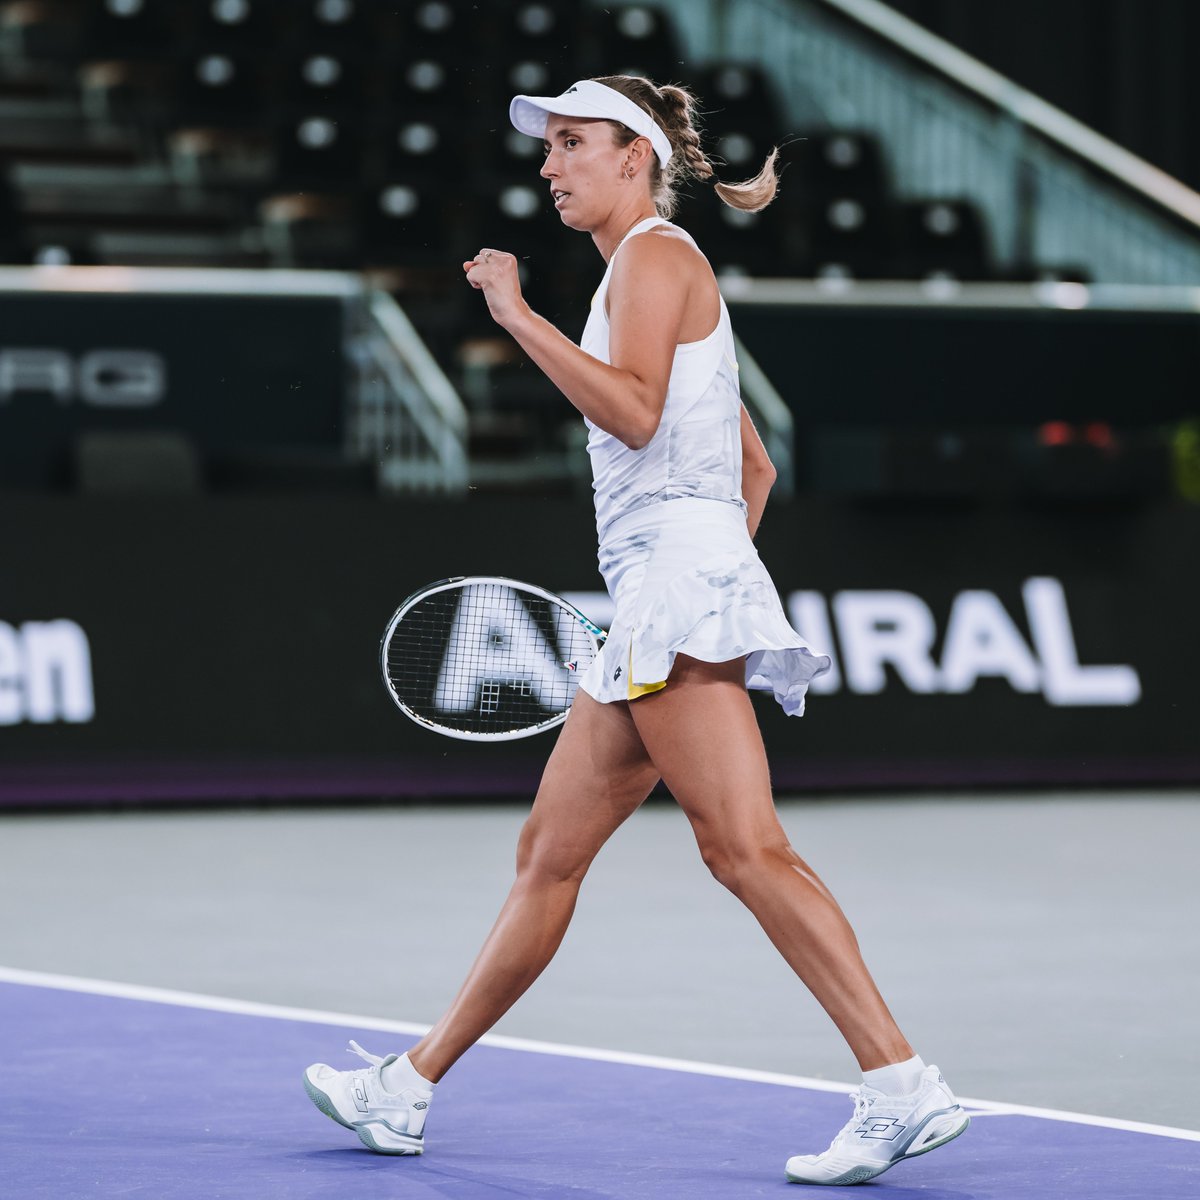 Fresh off her Australian Open doubles title, 2020 finalist @elise_mertens moves on to the quarterfinals knocking out Bronzetti 6-1, 6-3. #WTALinz